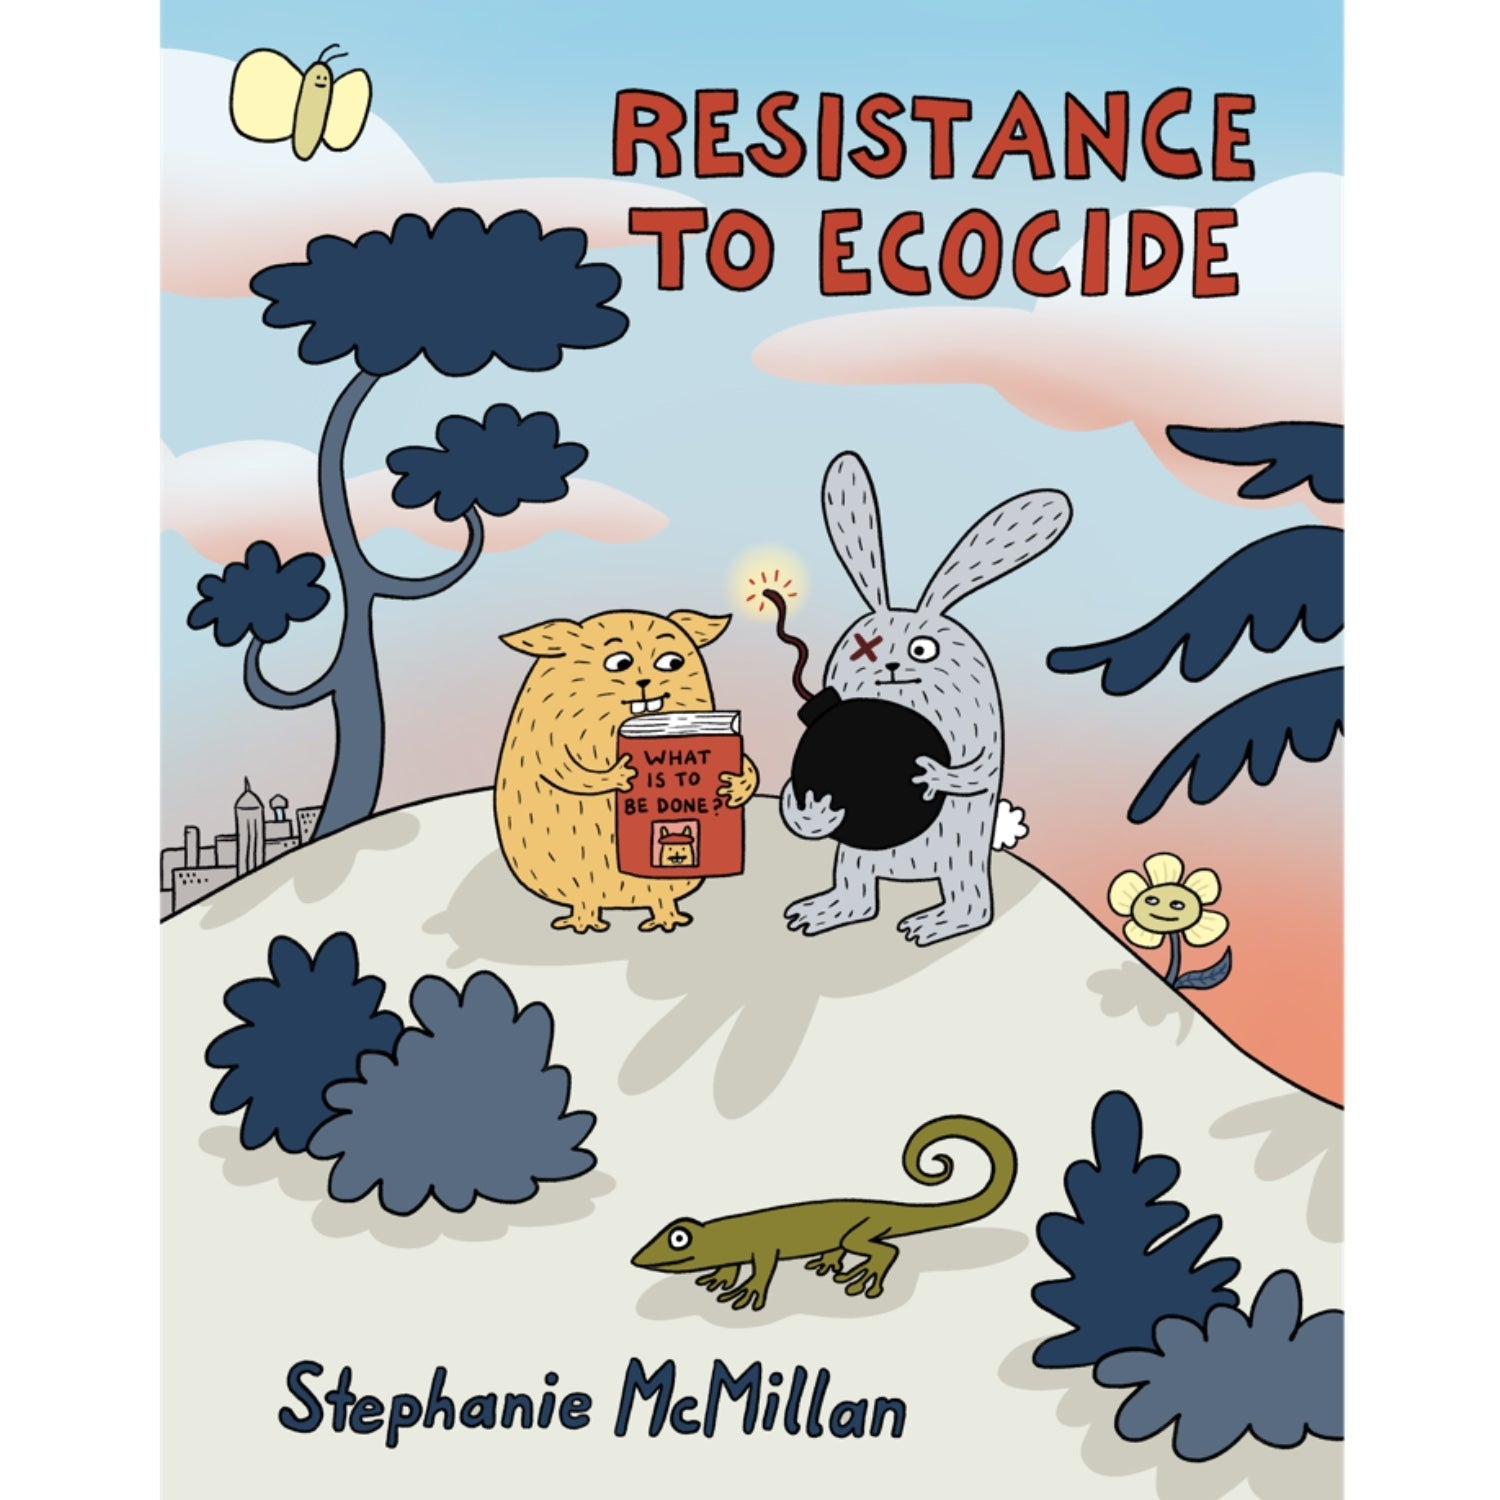 "Resistance to Ecocide" (digital file - PDF) *Payment is optional*